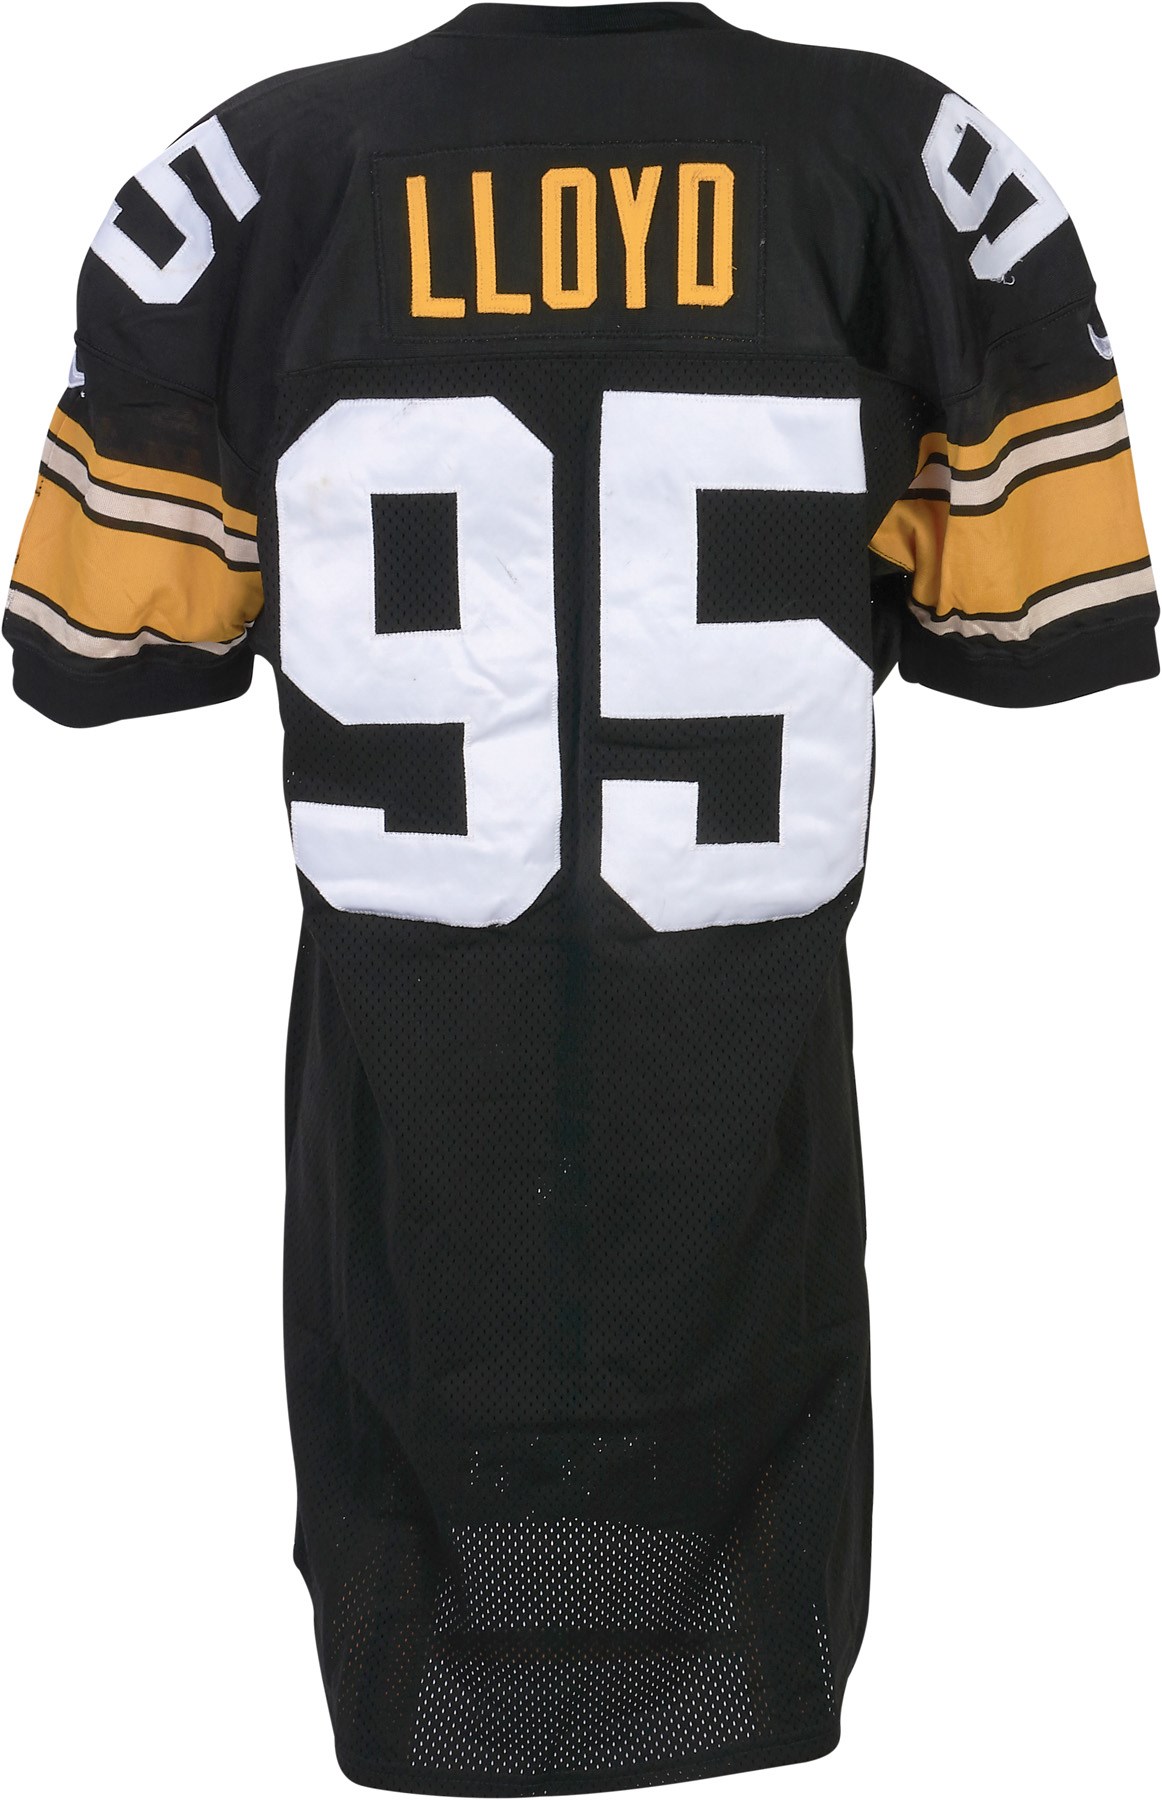 The Pittsburgh Steelers Game Worn Jersey Archive - 1996 Greg Lloyd Pittsburgh Steelers Game Worn Jersey (Photo-Matched)